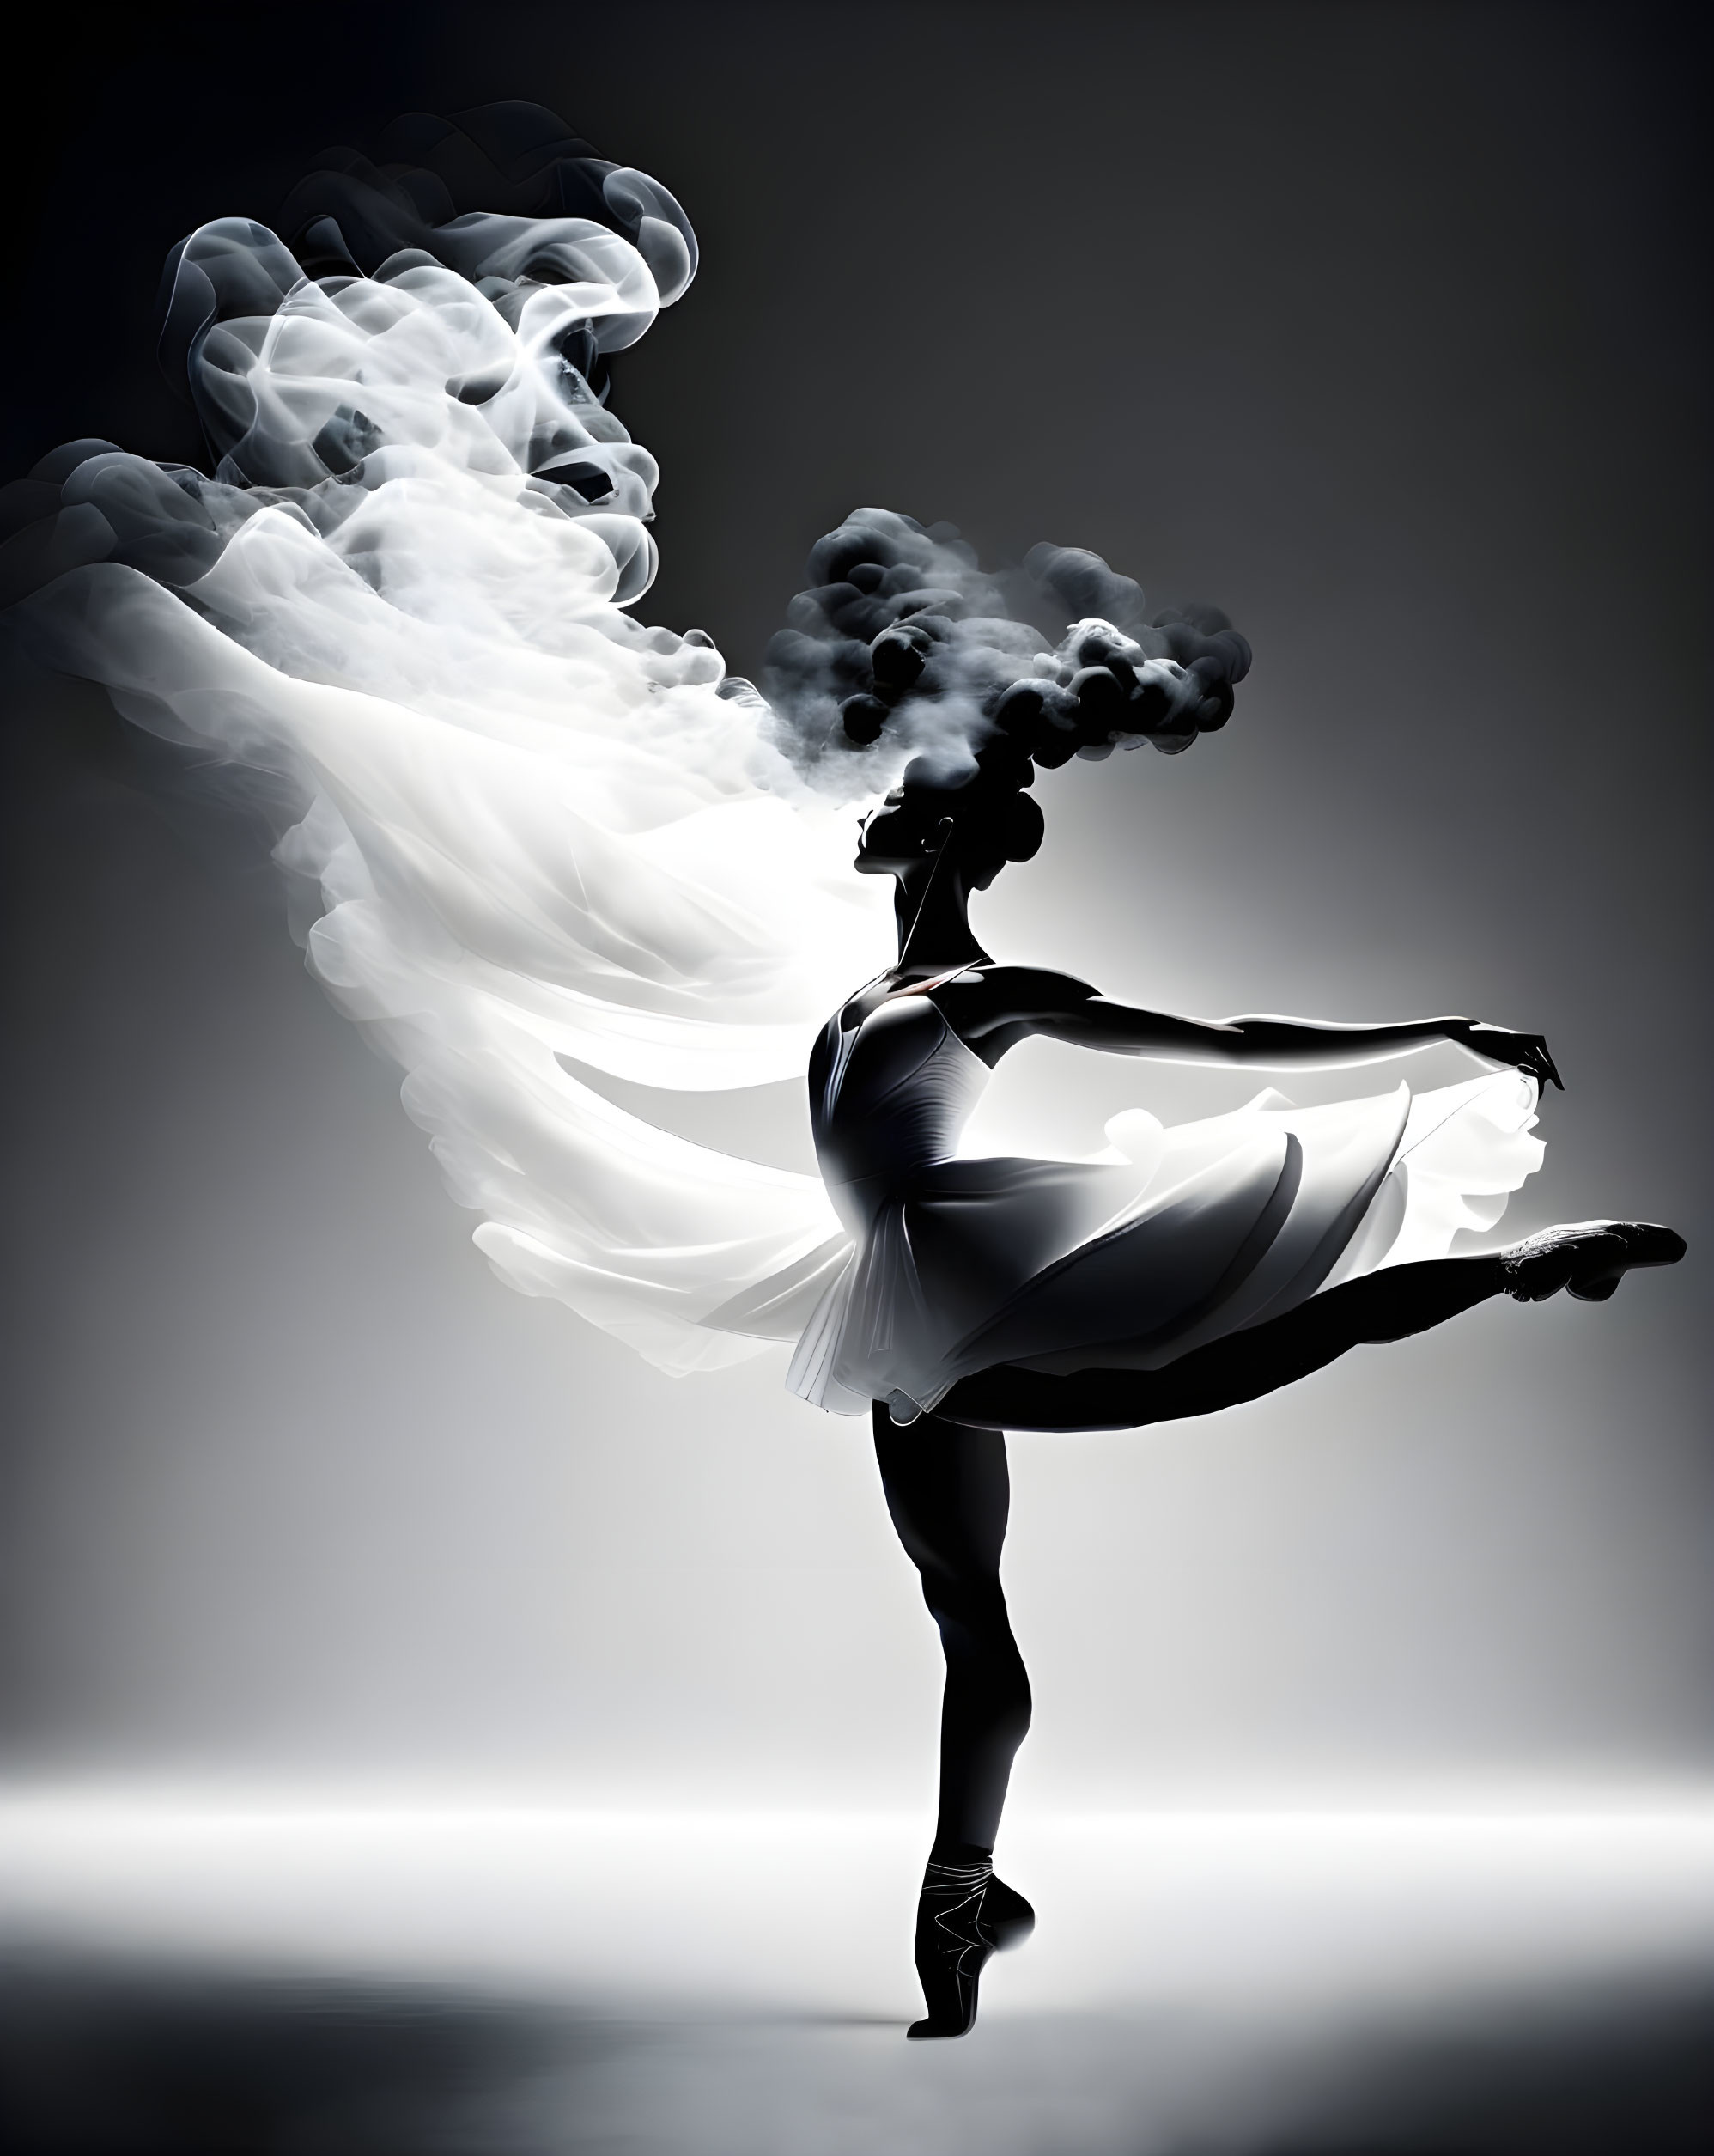 Black and White portrait of a dancer in smoke